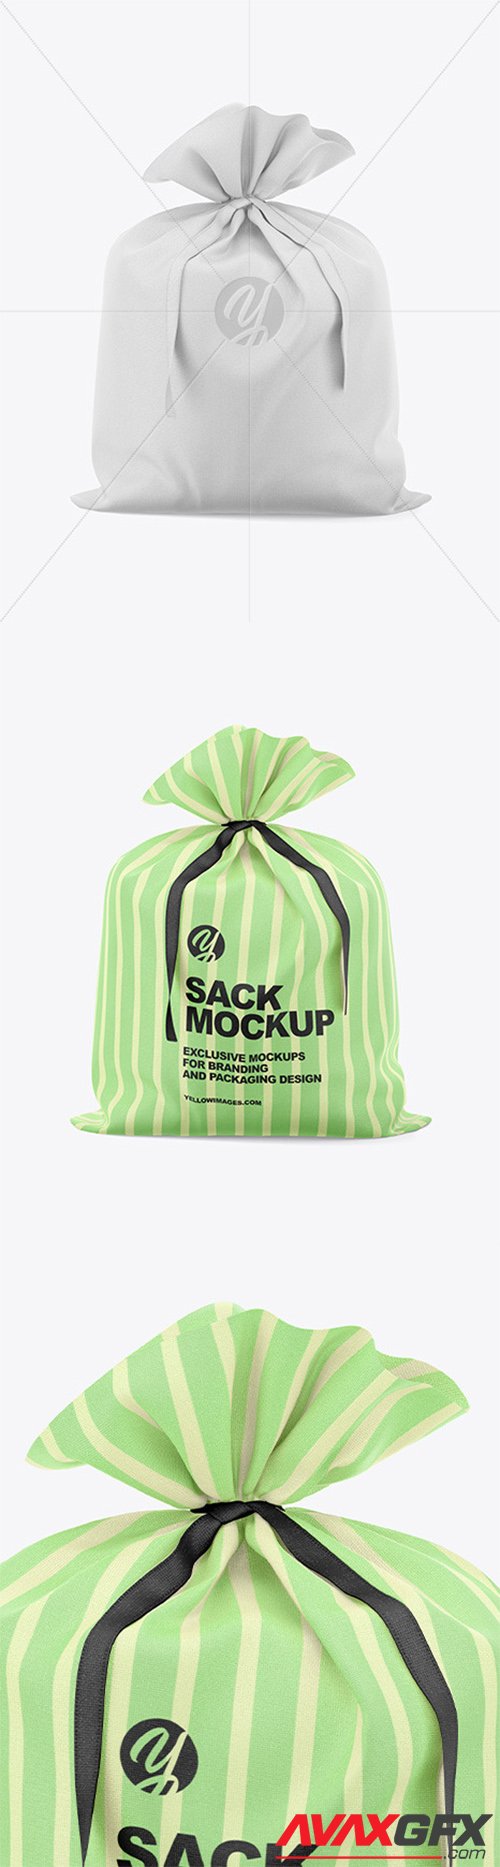 Fabric Sack Mockup - Front View 57808